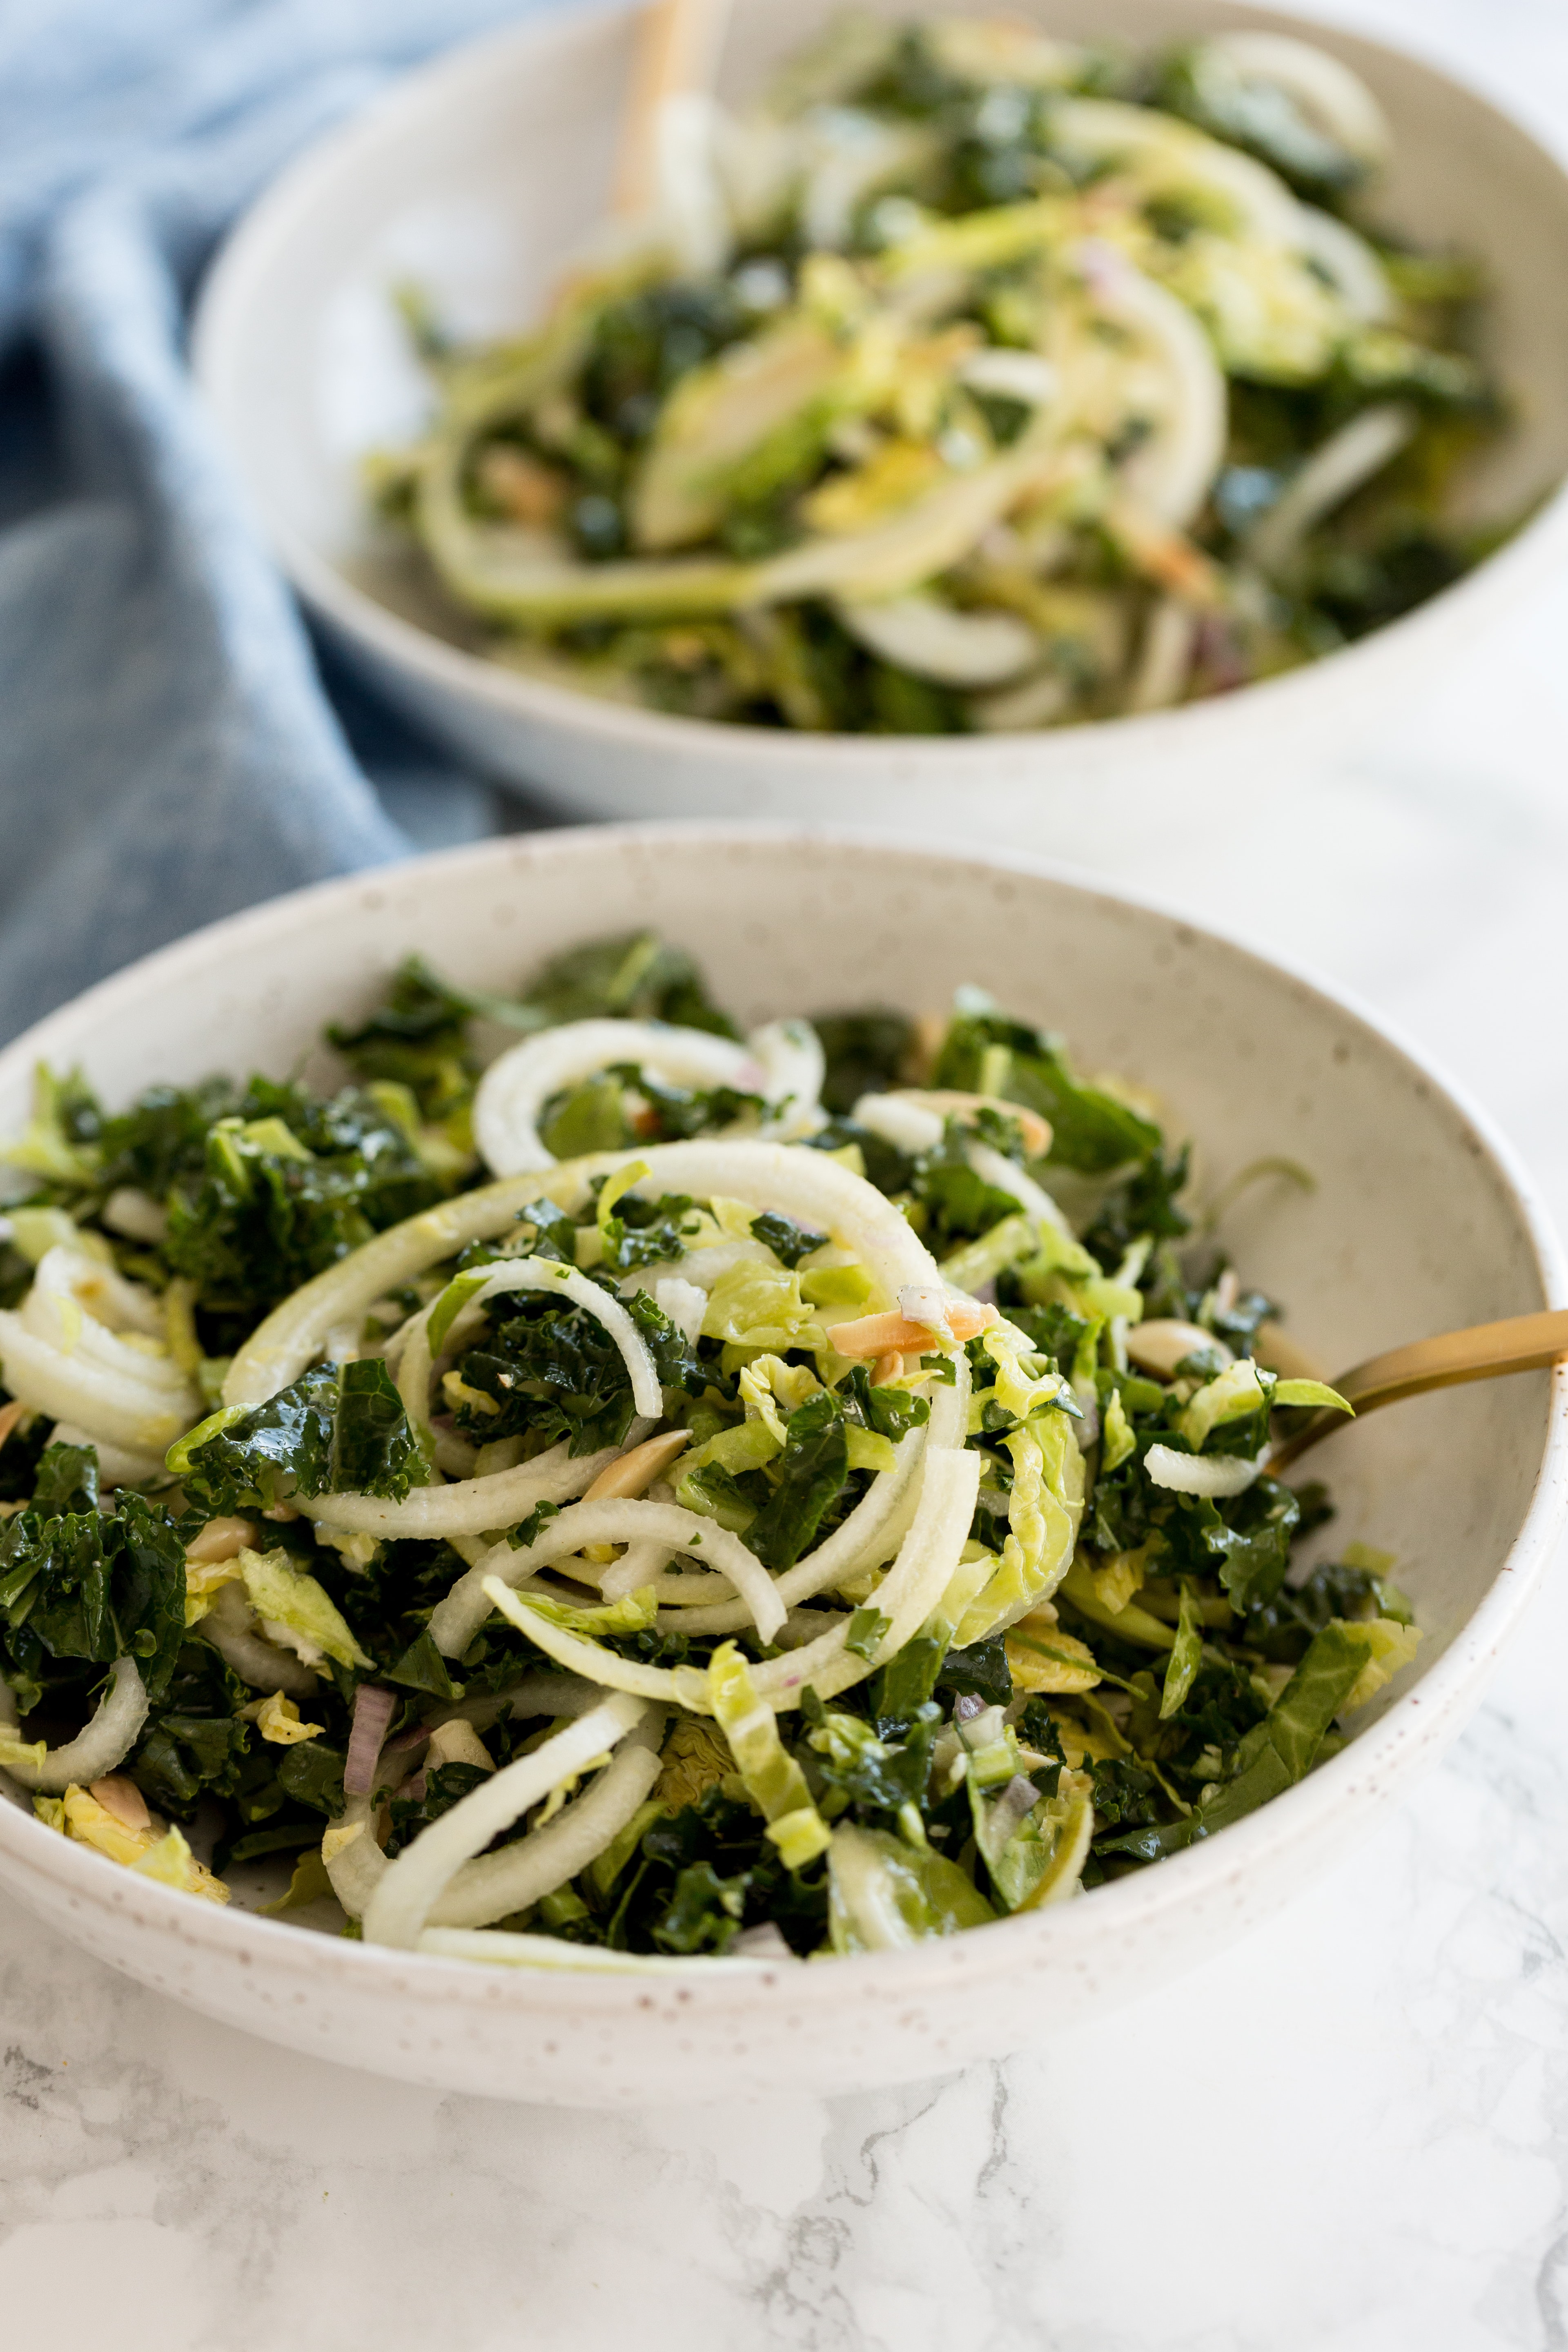 Shredded Kale, Pear and Brussels Sprouts Salad